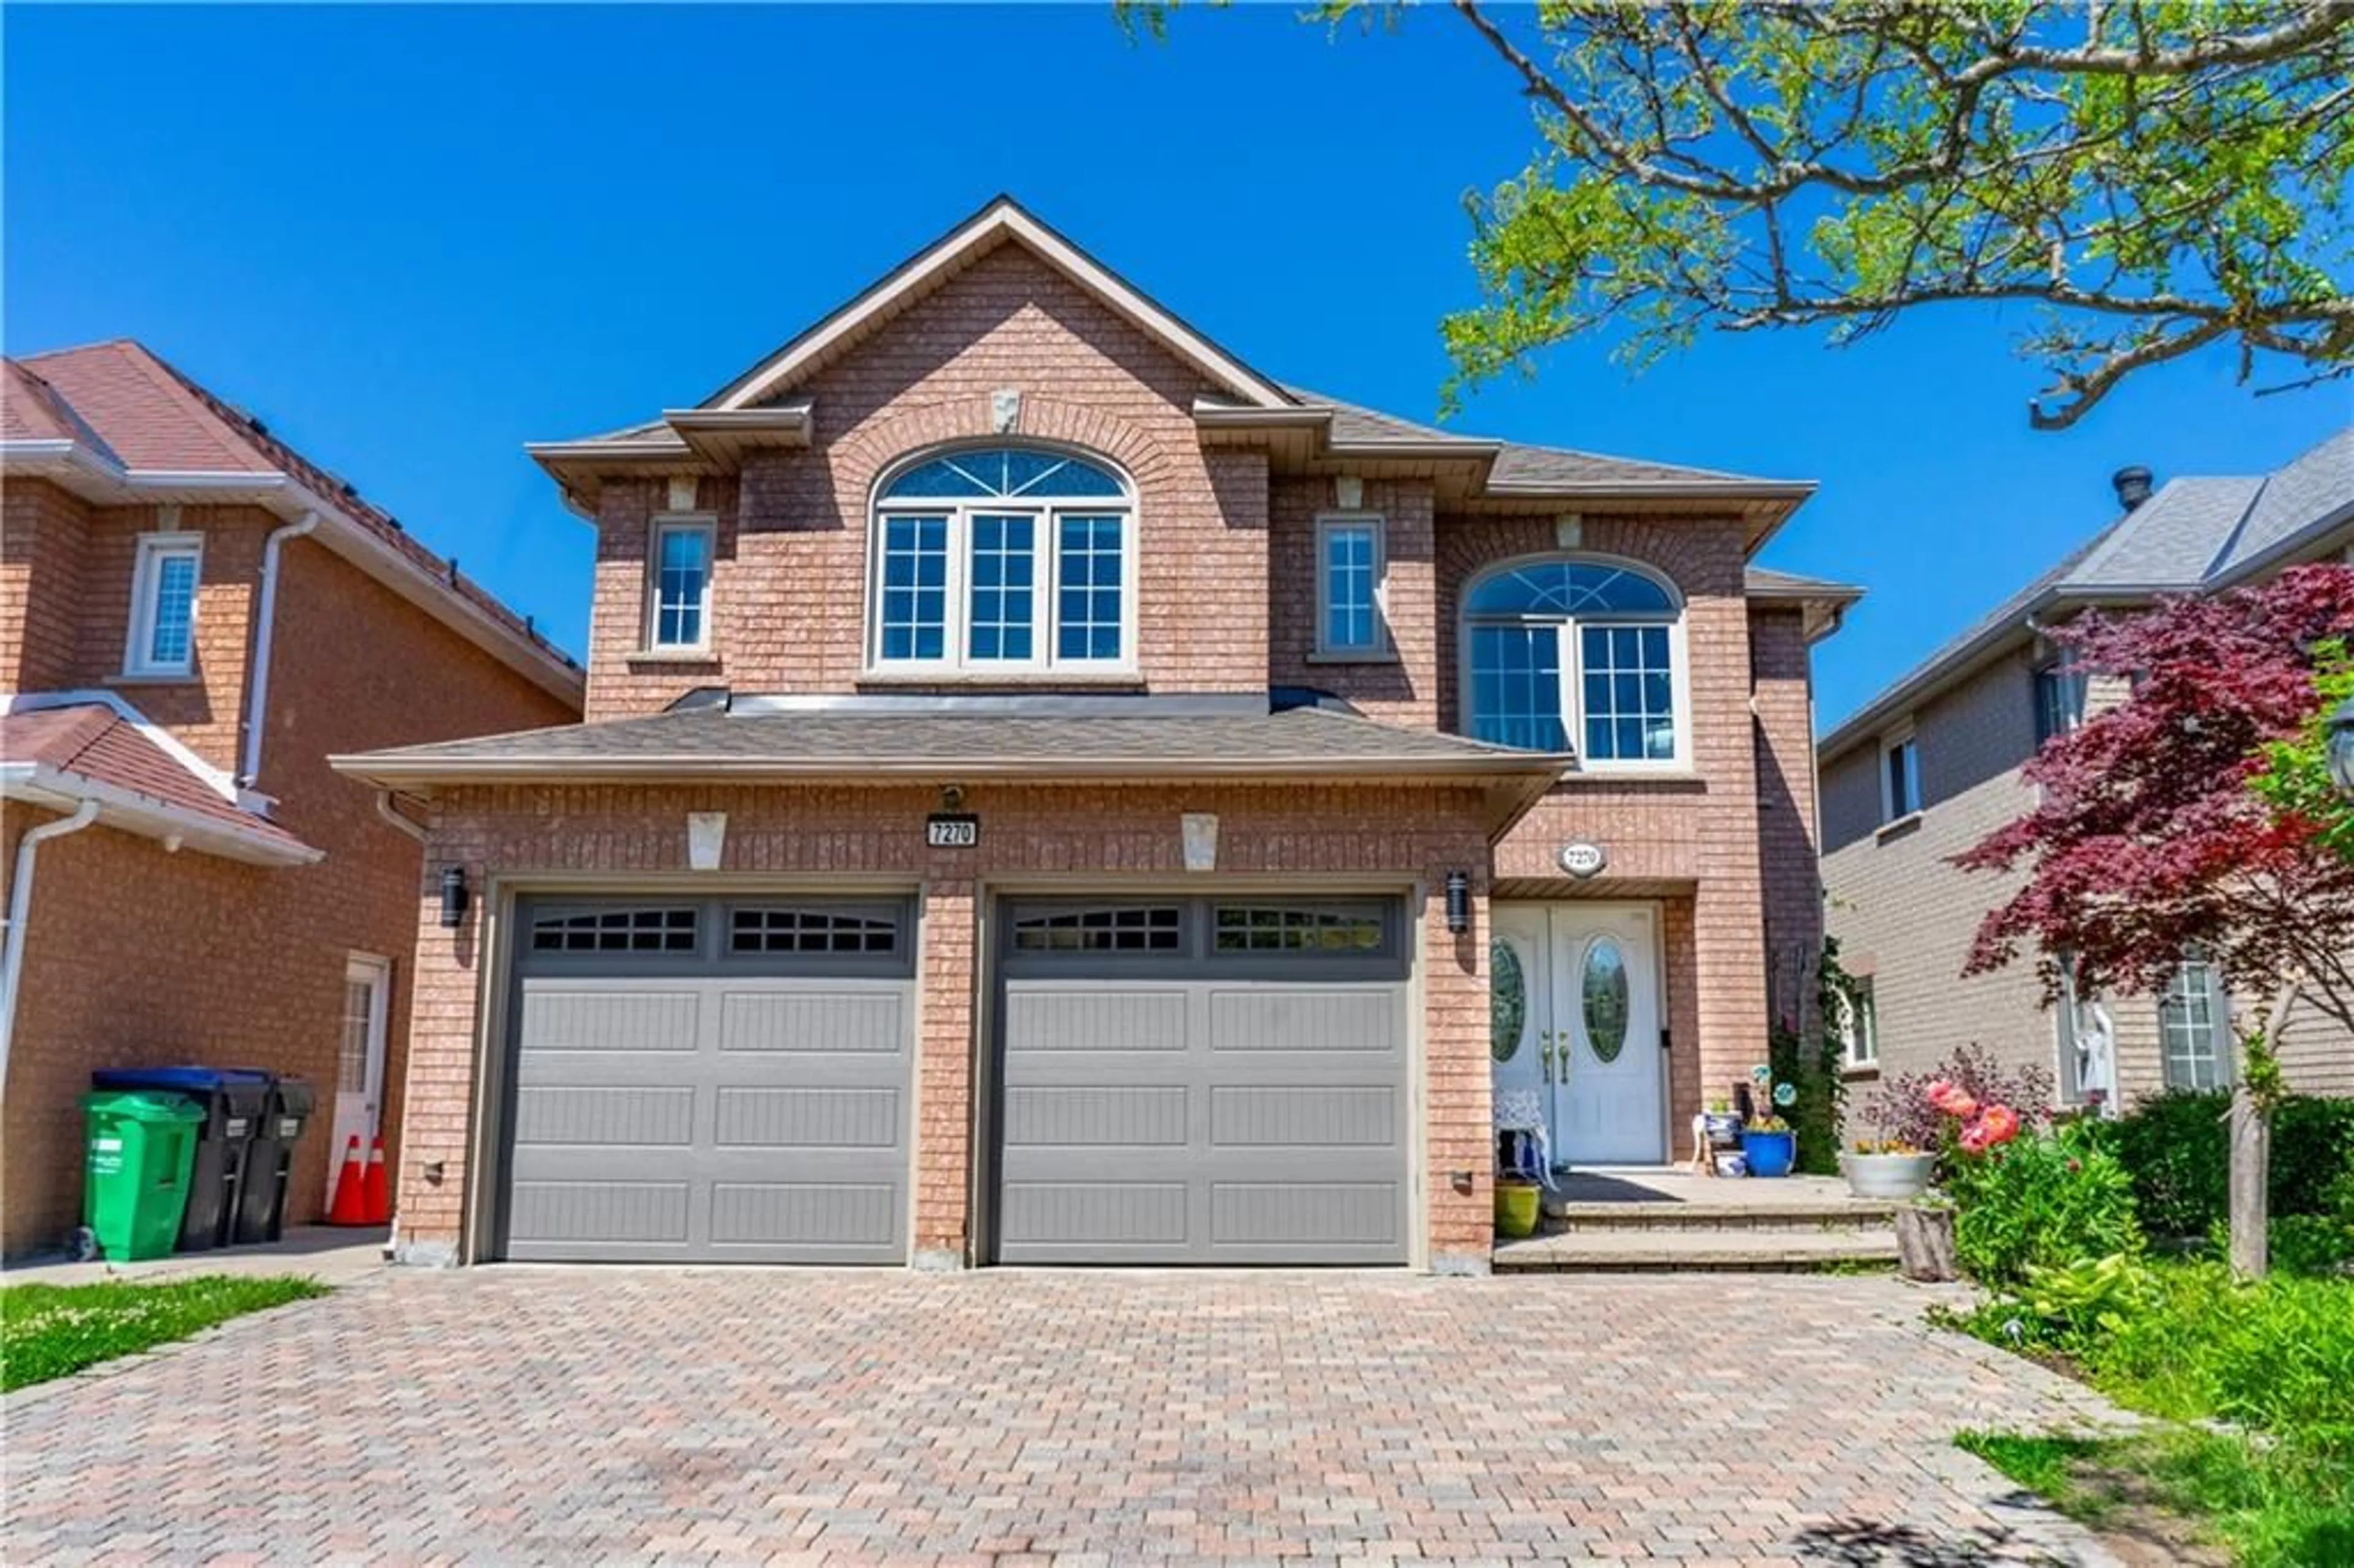 Home with brick exterior material for 7270 SANDHURST Dr, Mississauga Ontario L5N 7G8